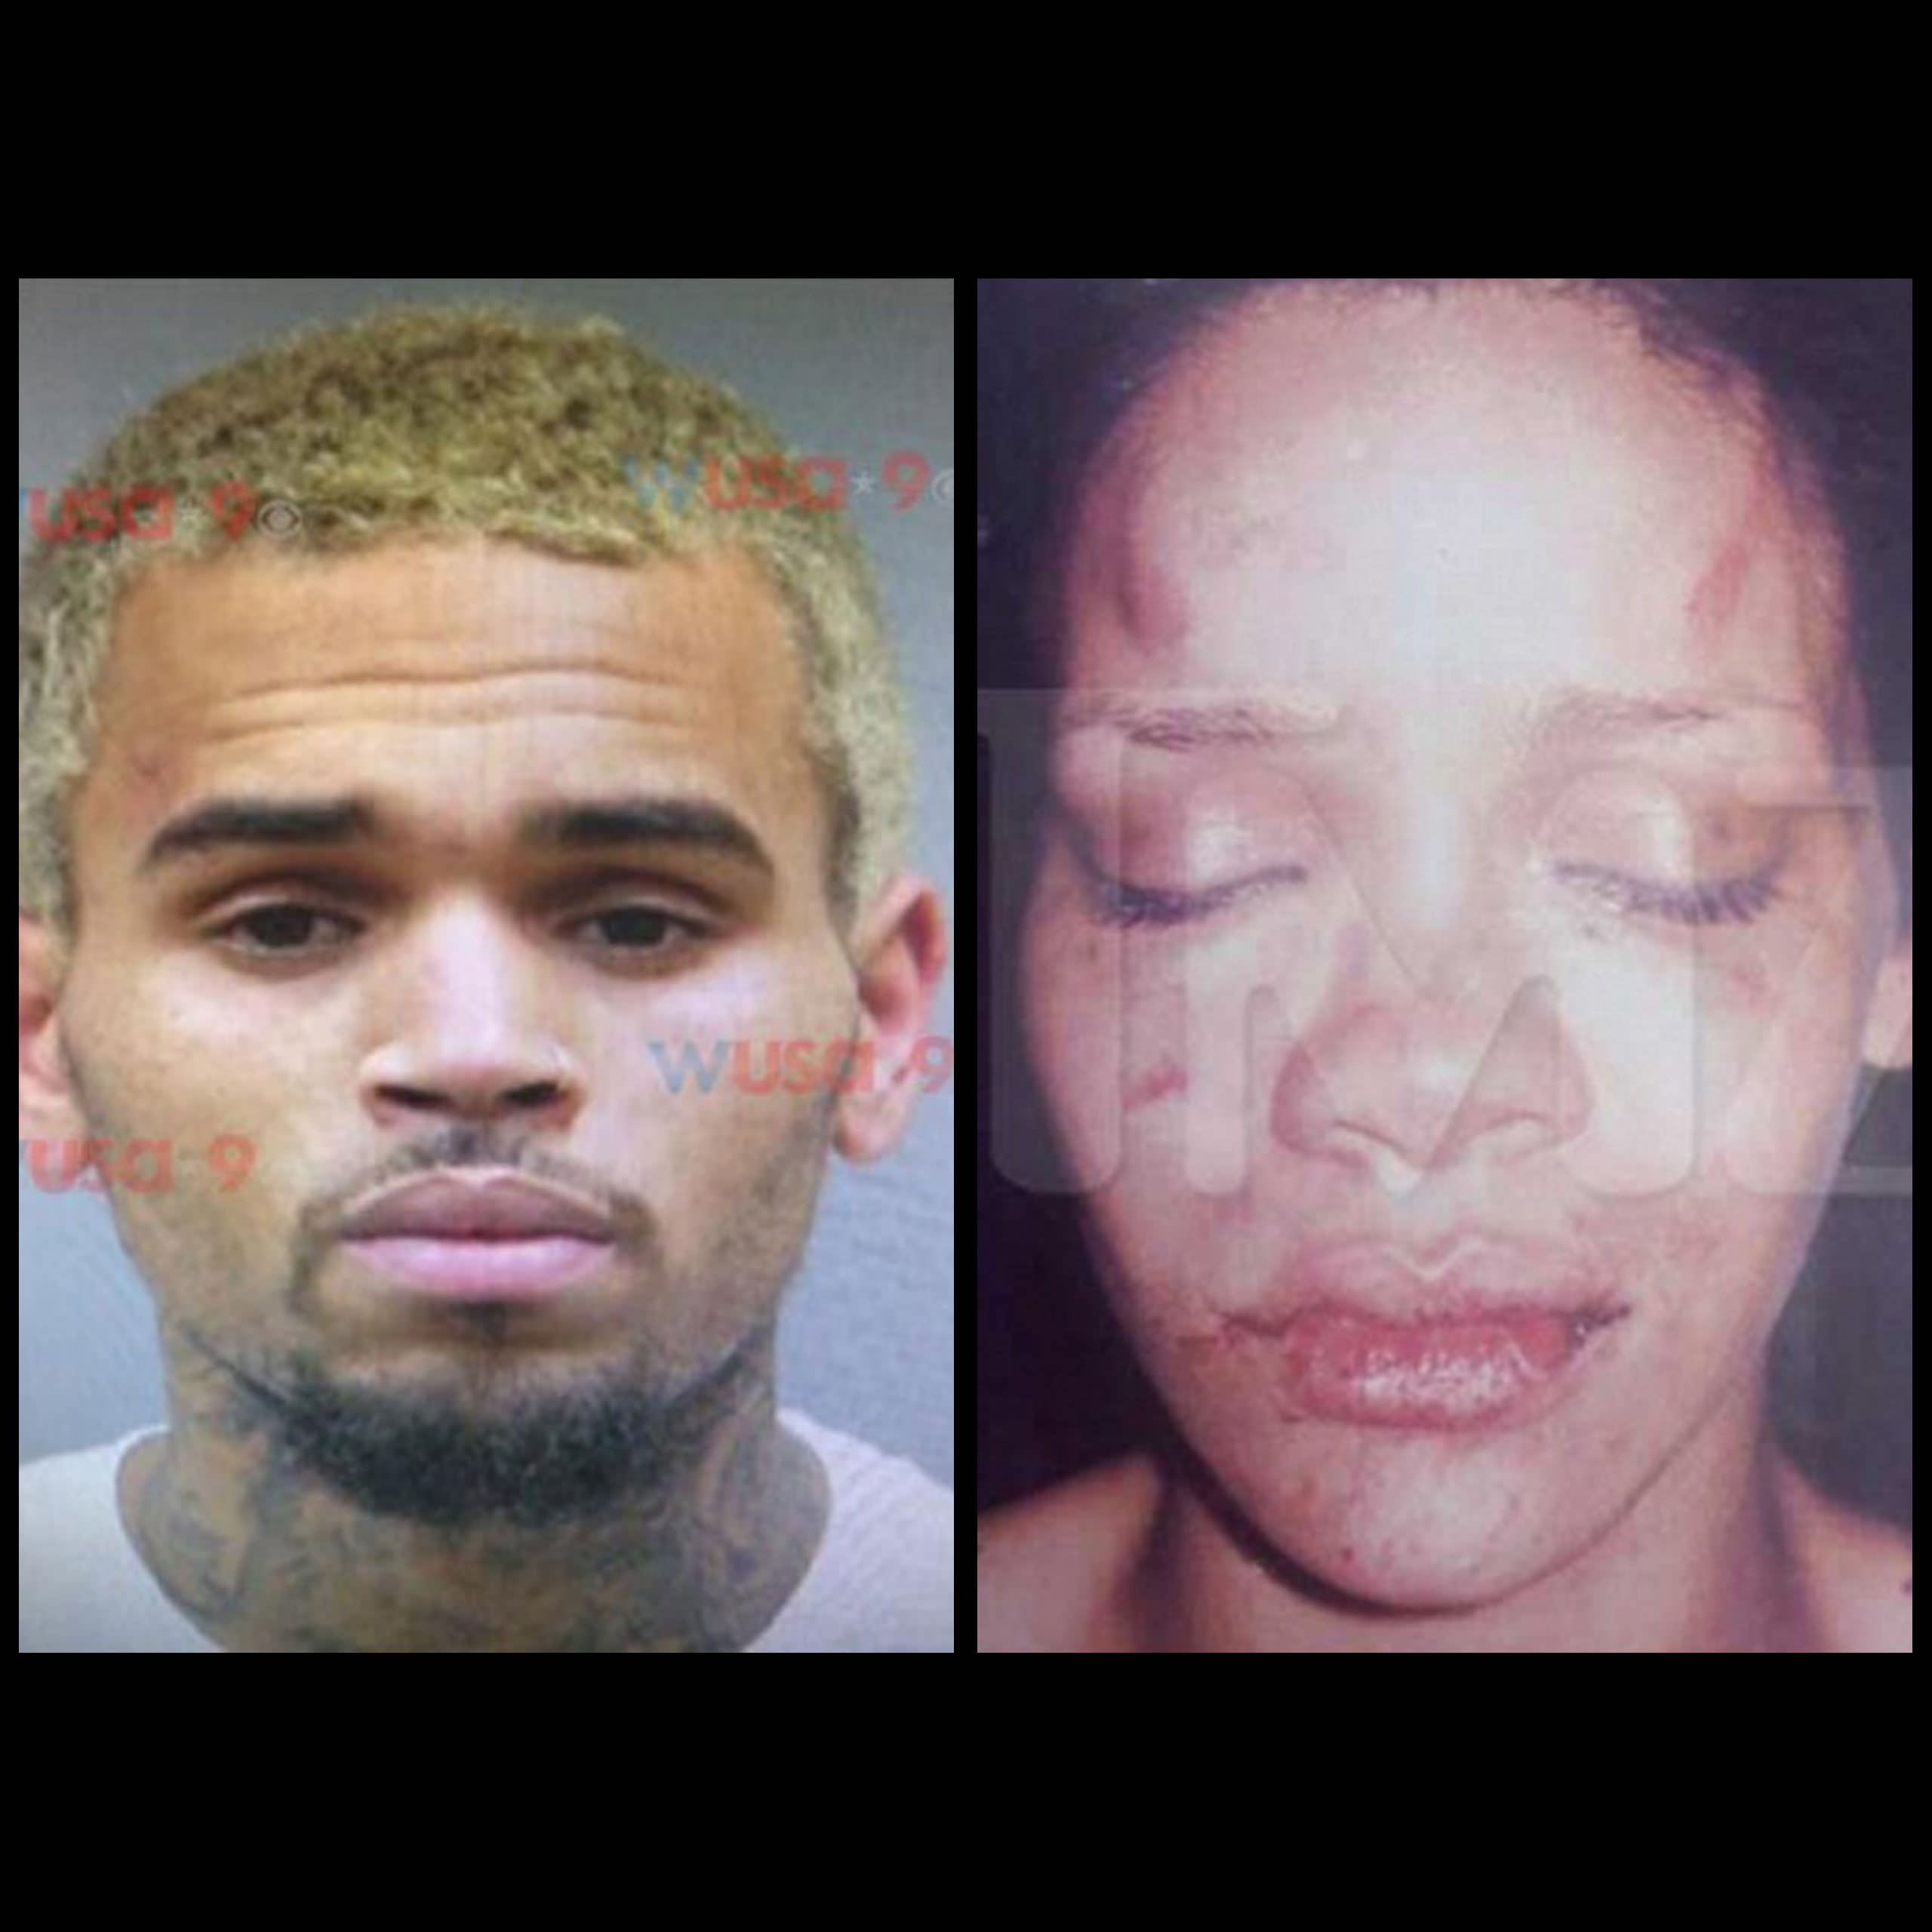 Pictures of rihannas facial injuries